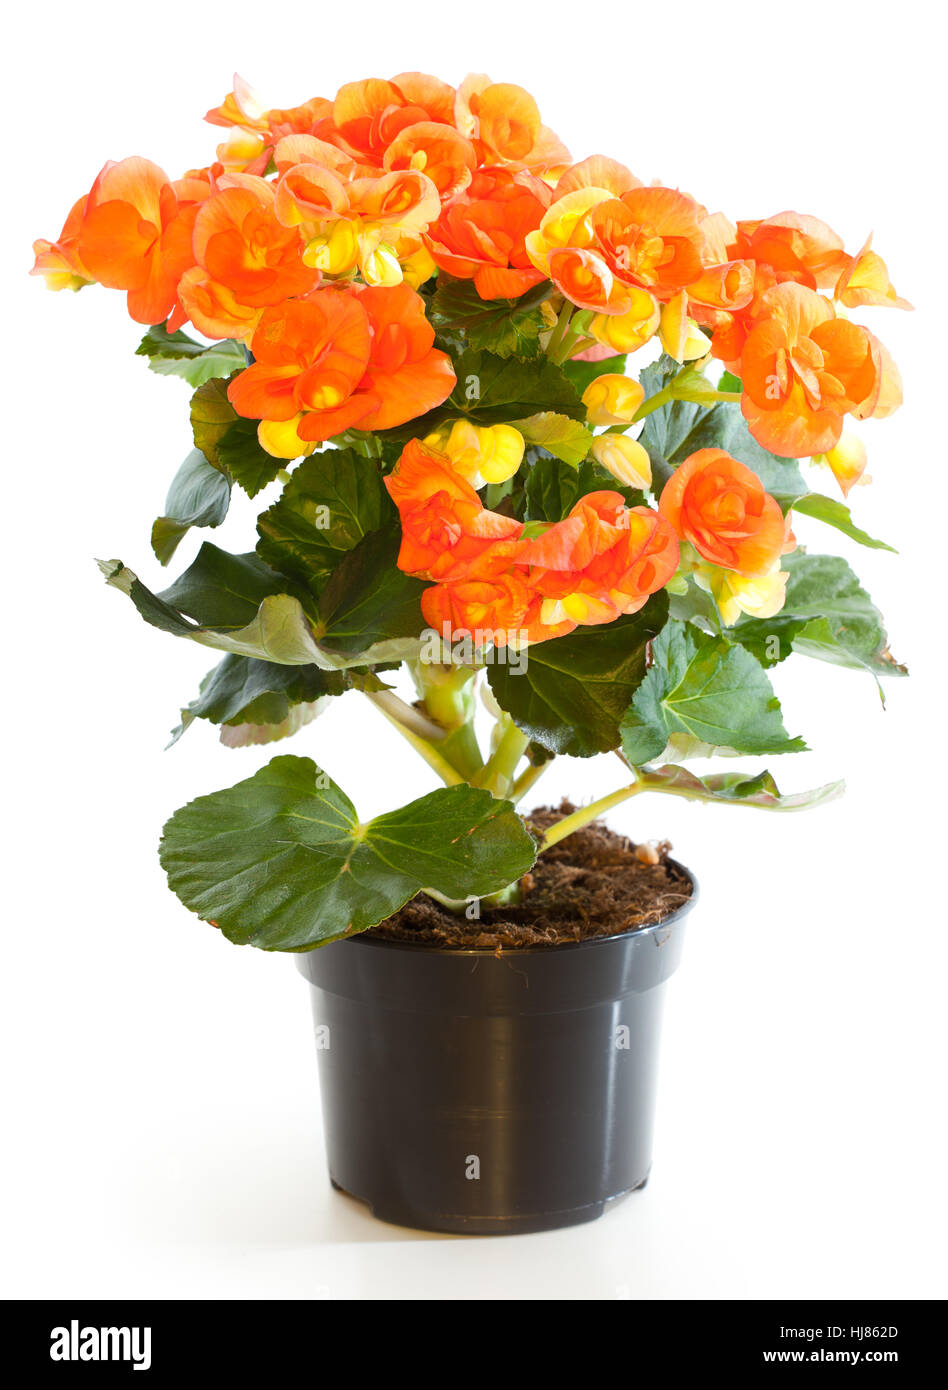 Blossoming plant of begonia in flowerpot isolated on white. Stock Photo